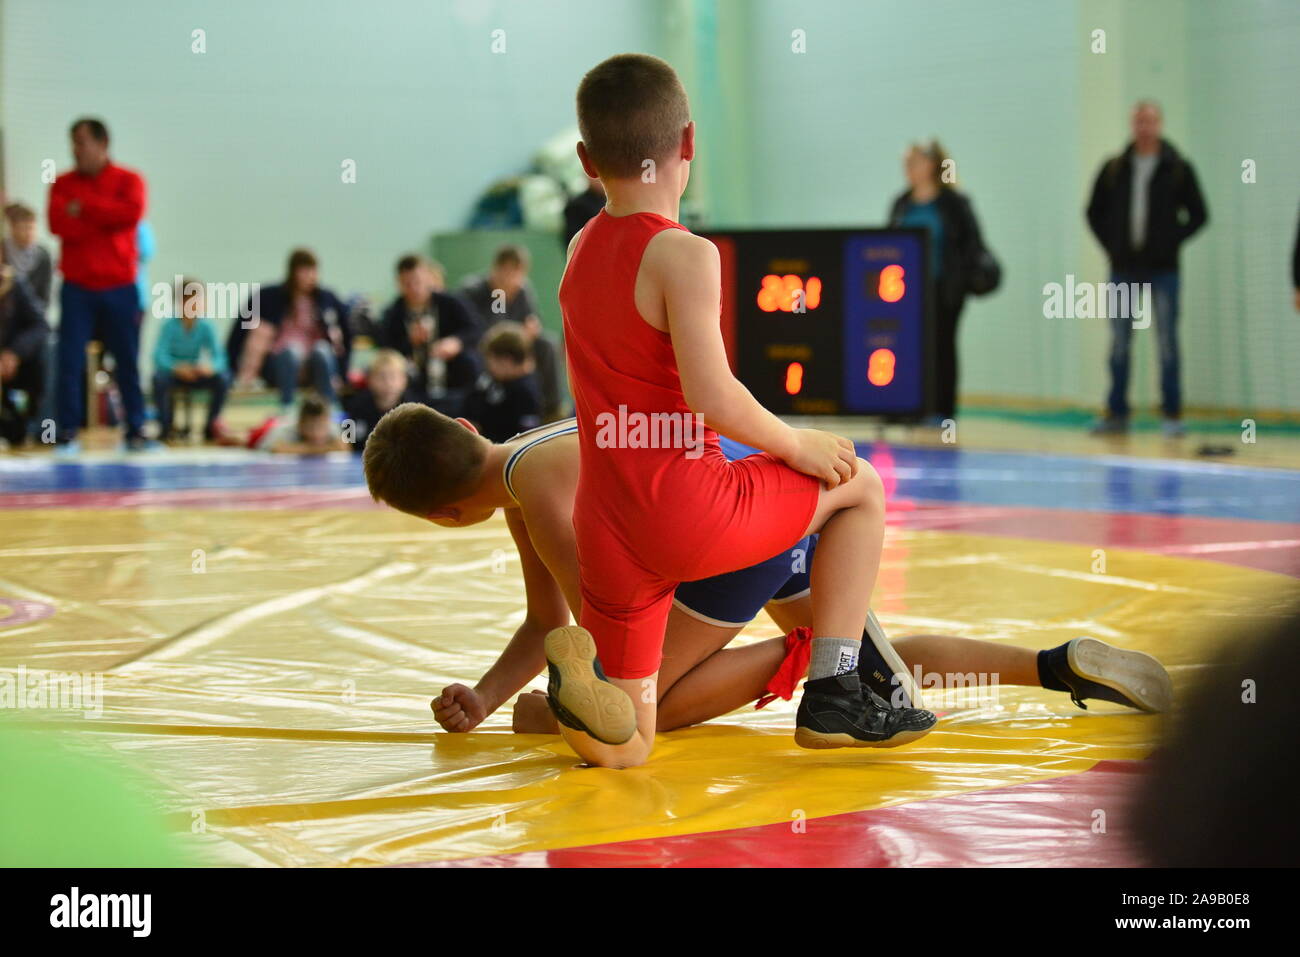 04.11.2017 Russia Novomoskovsak Sport Dvorets Children's wrestling competitions, illustration of disappointment from defeat Stock Photo